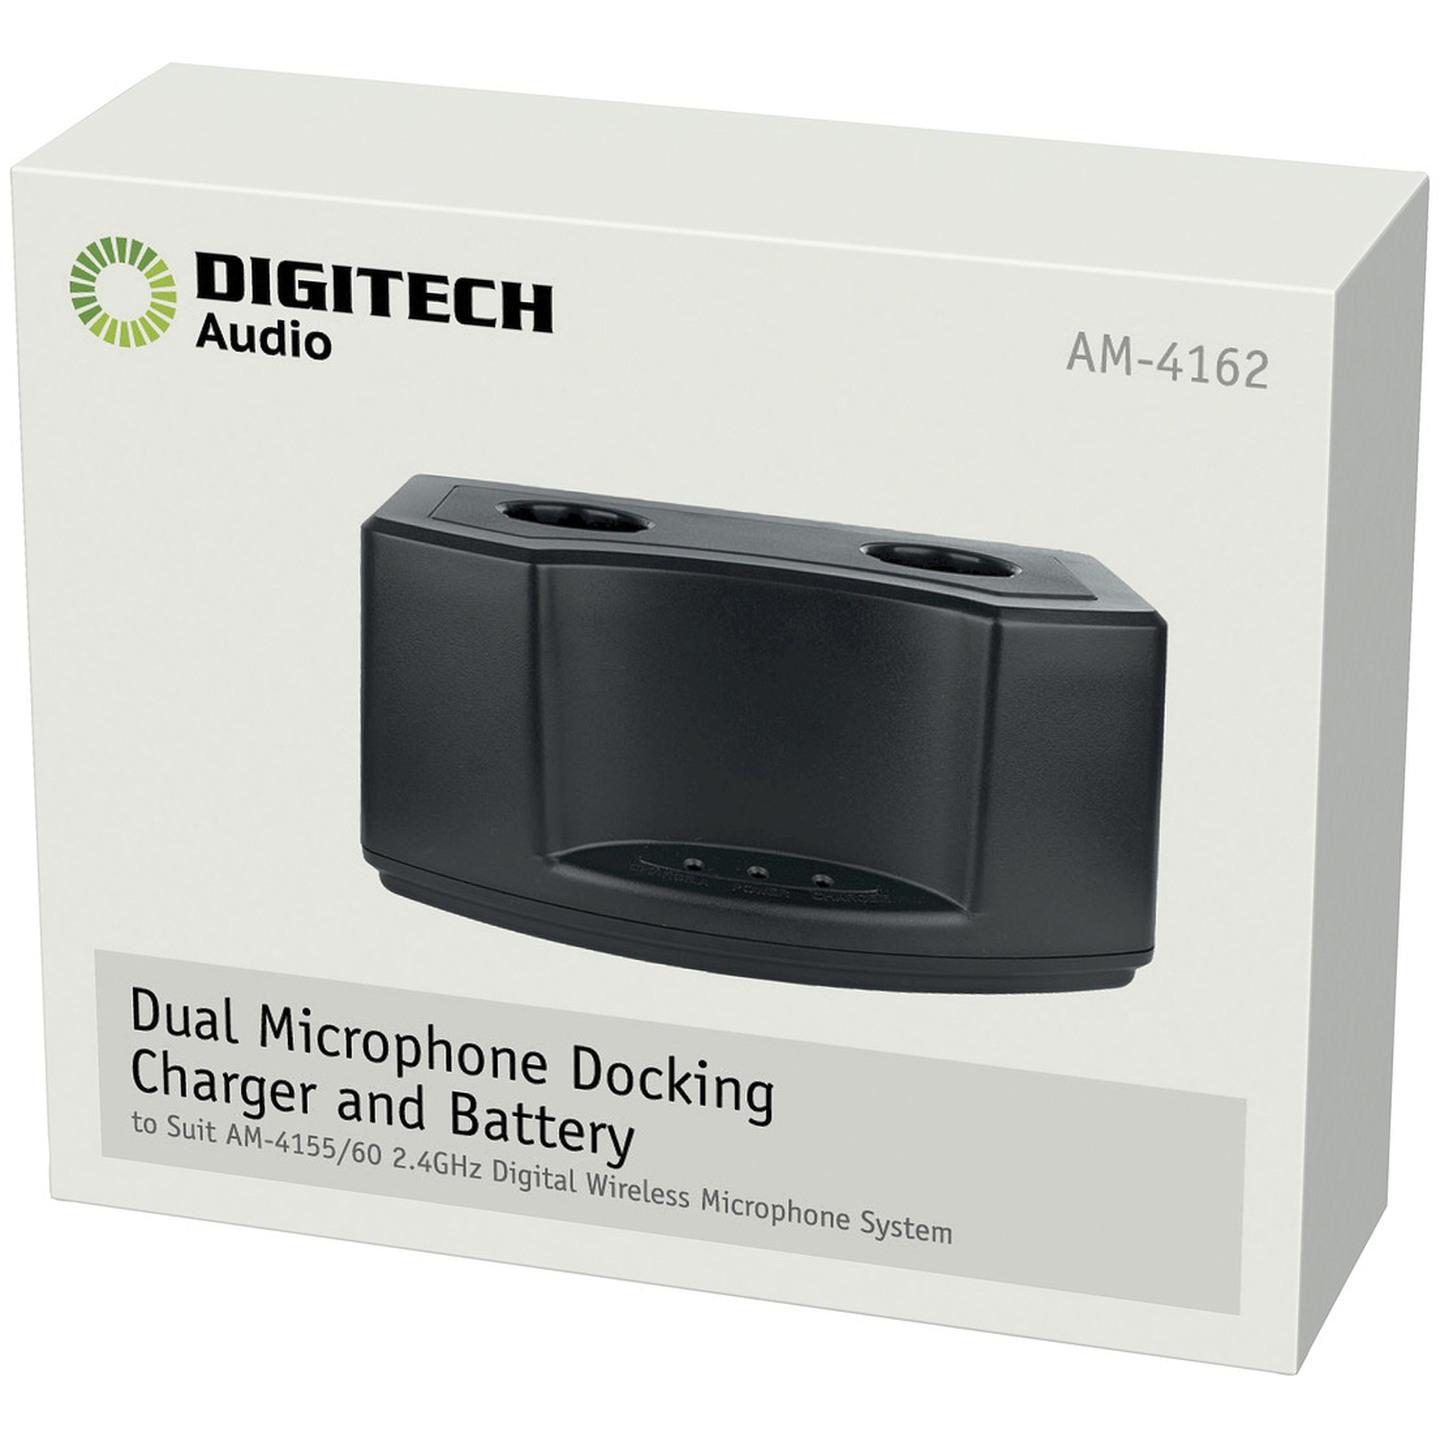 Dual Microphone Dock Charger and Battery to suit AM4155/60